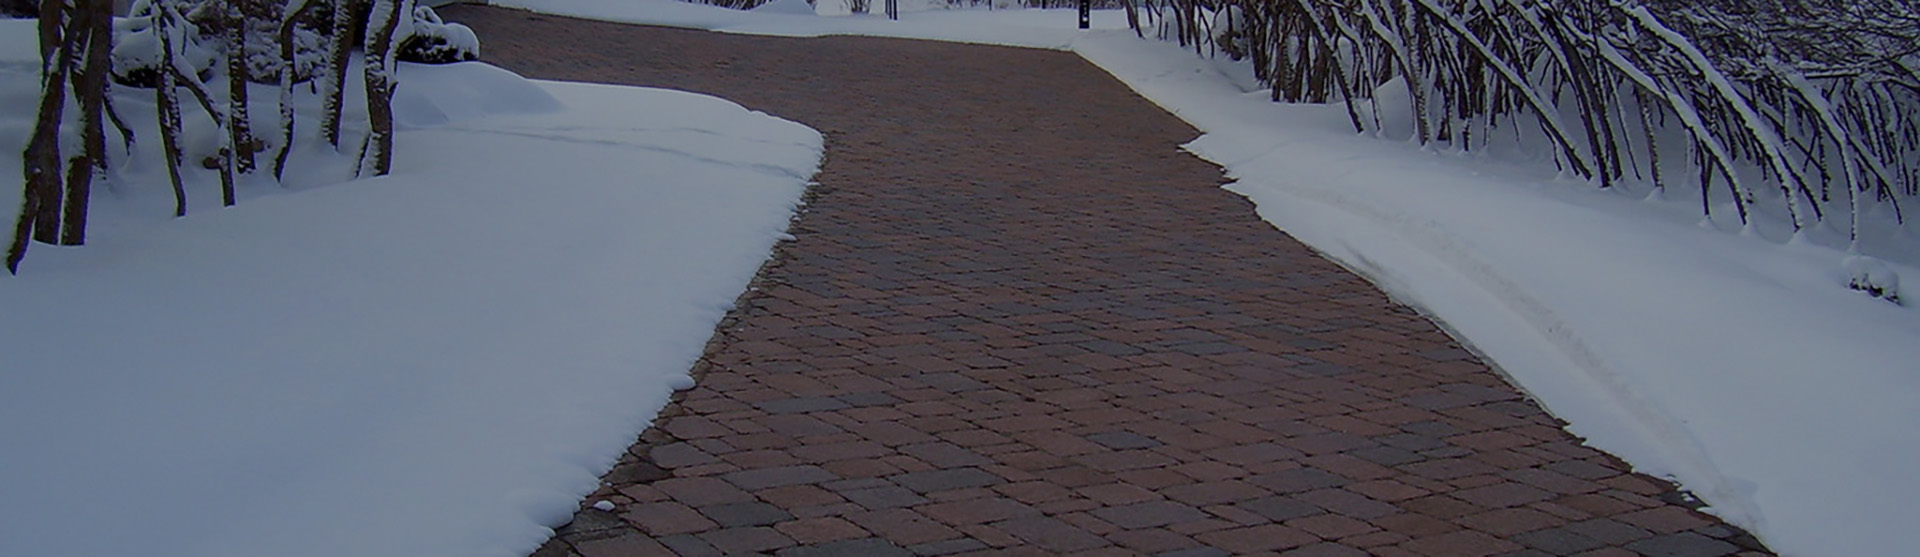 Radiant heated driveway with brick pavers banner